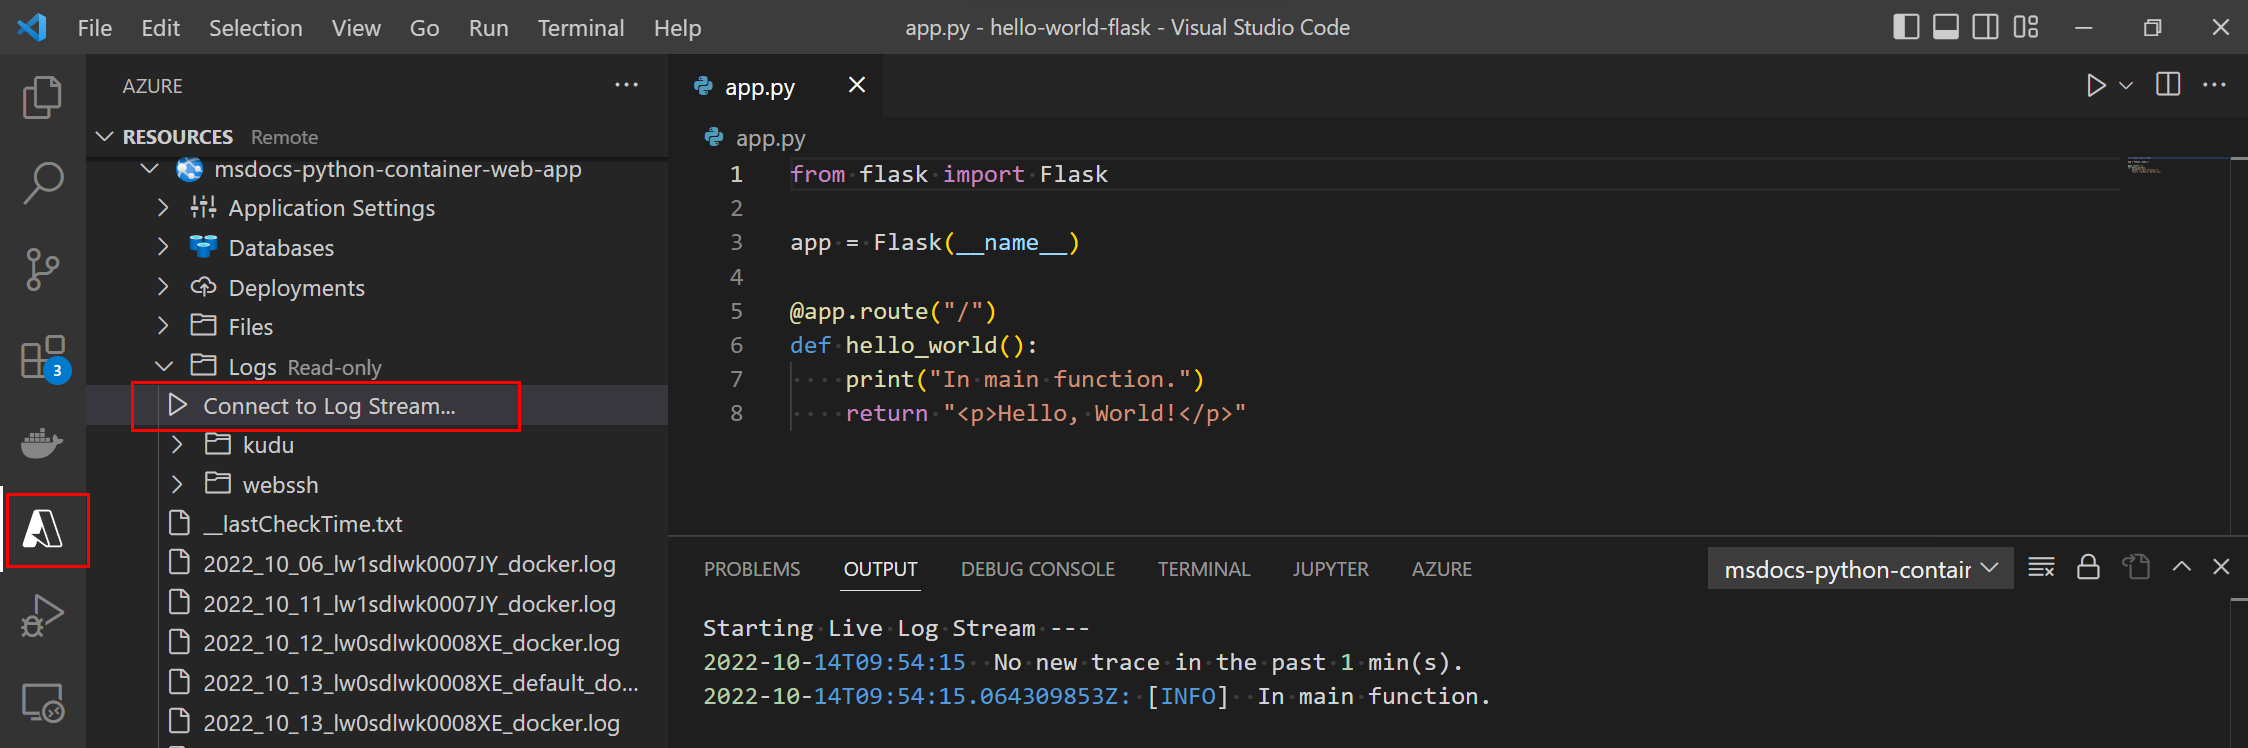 Screenshot showing how to view logs in VS Code for Web Apps for Containers.